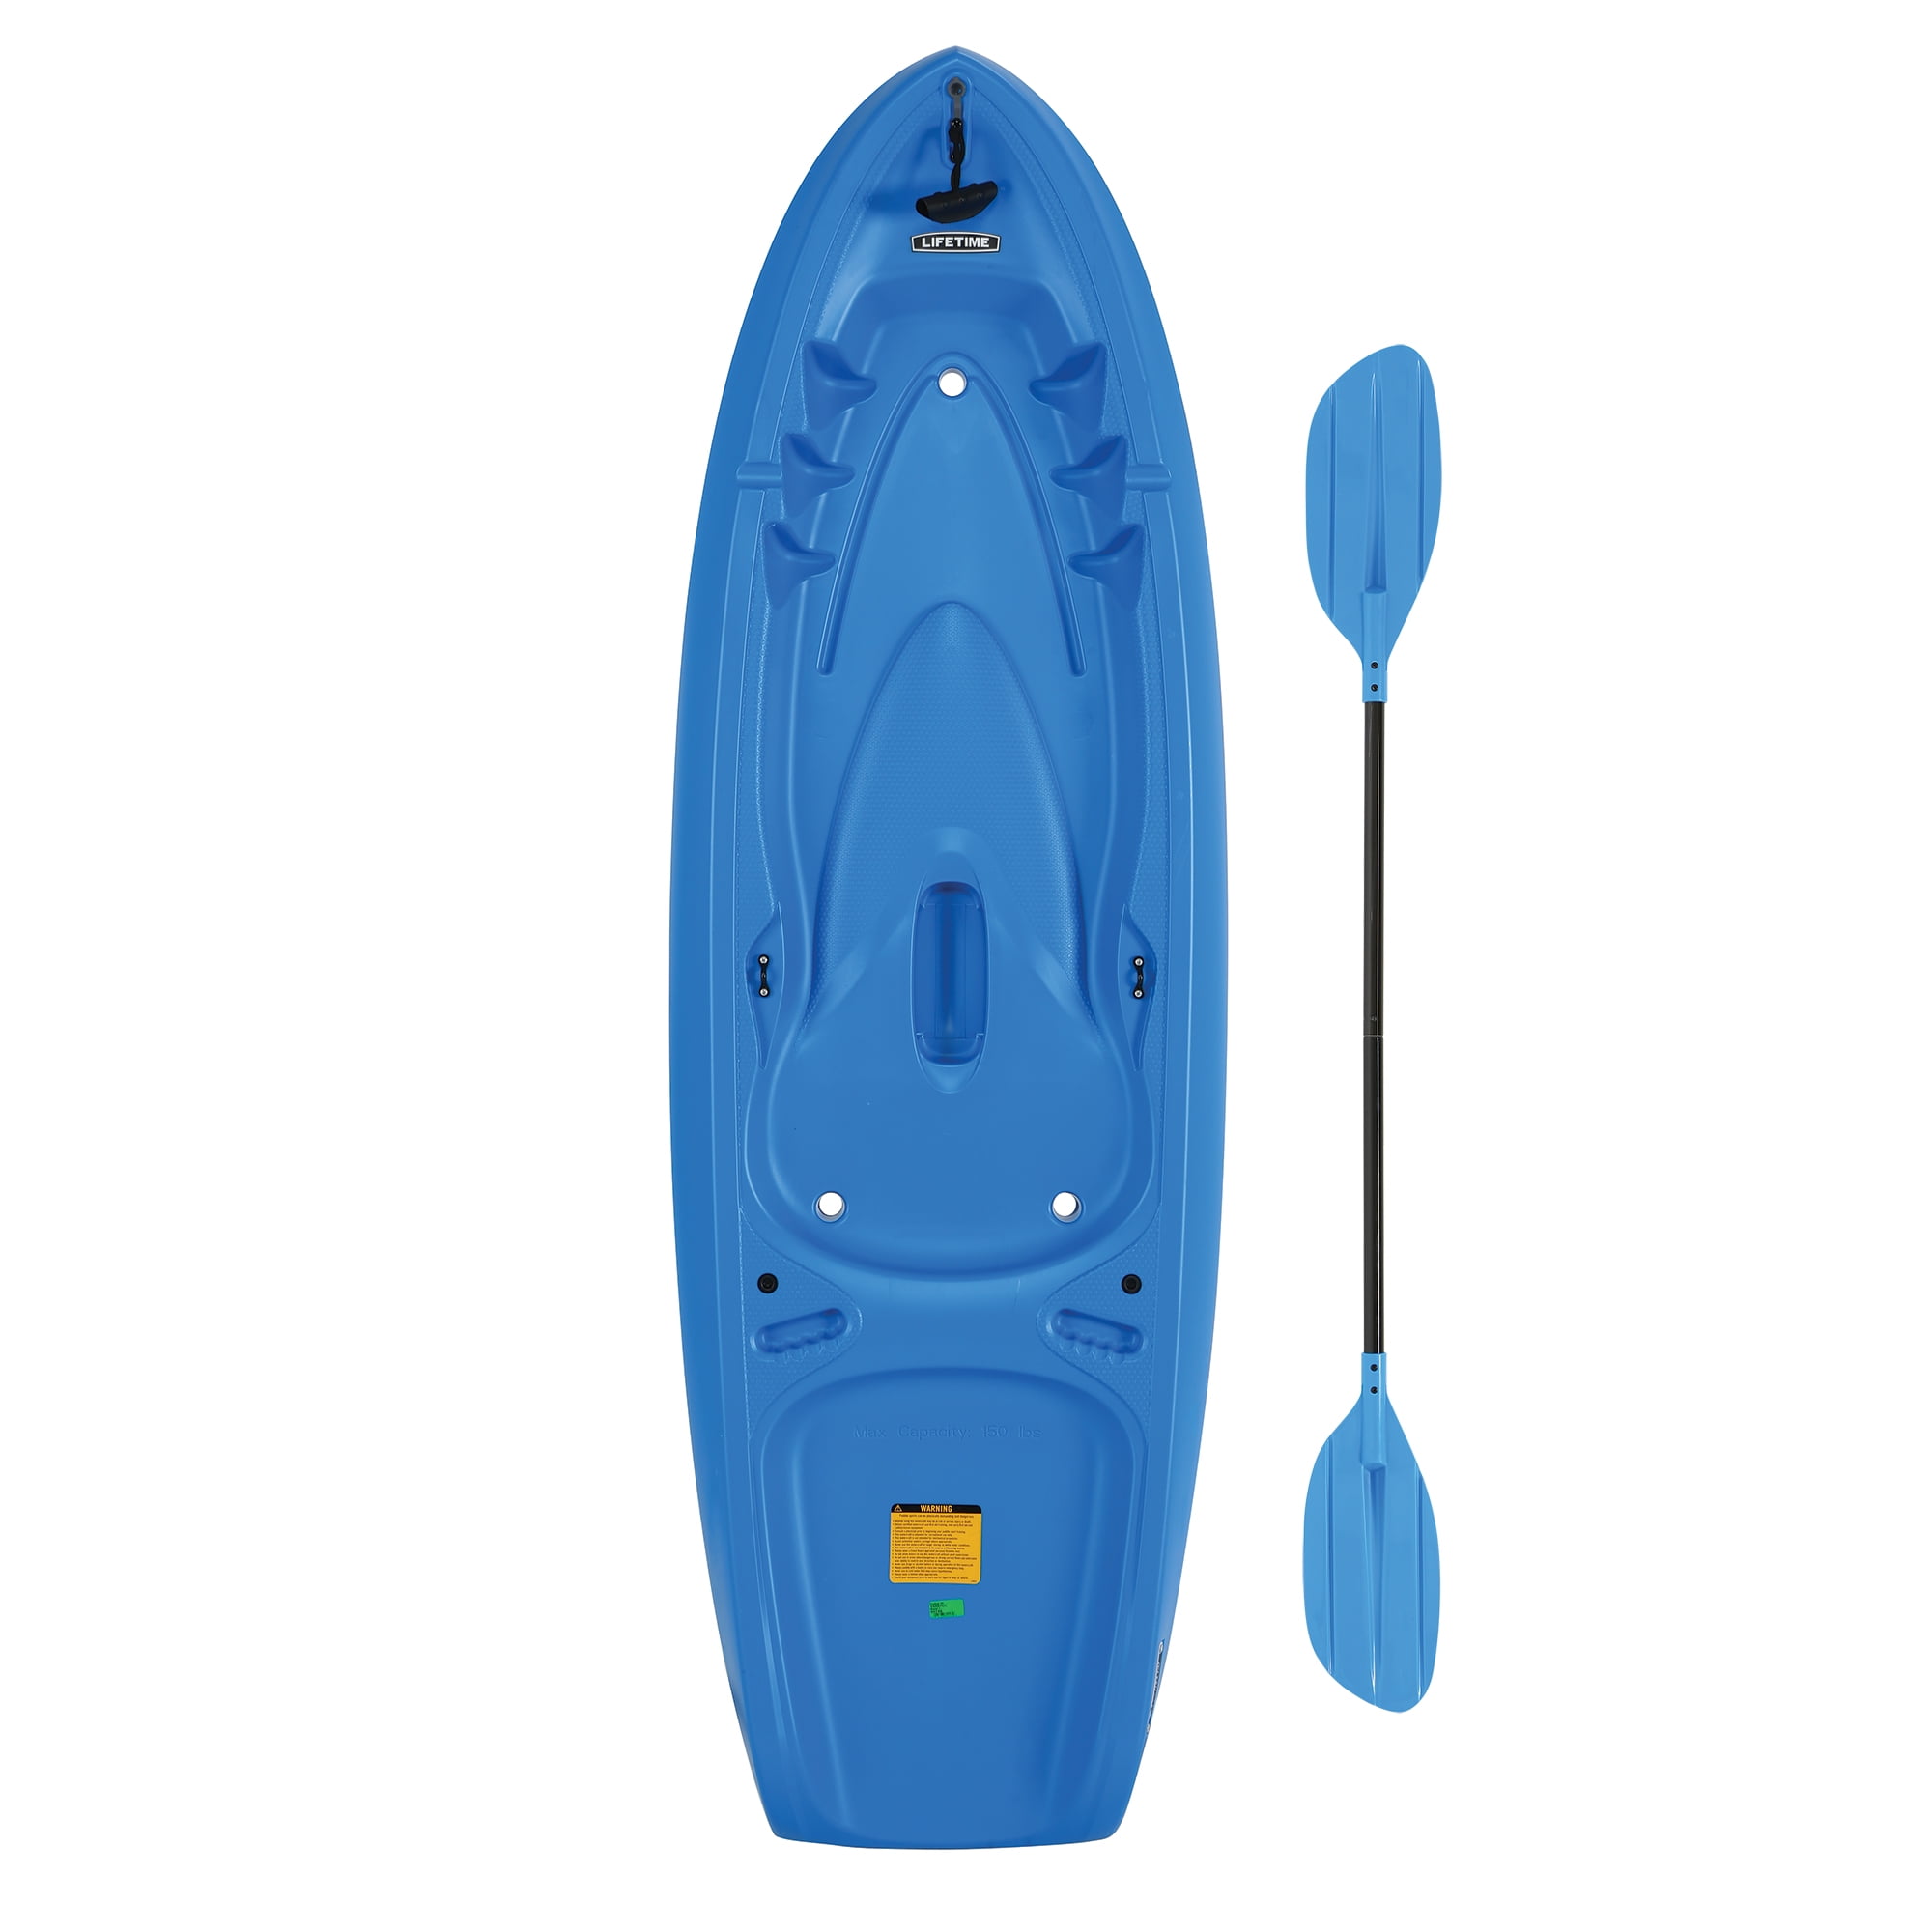 Lifetime Recruit 6.5 ft Youth Sit-on-Top Kayak, Dragonfly Blue (90746) - image 1 of 14